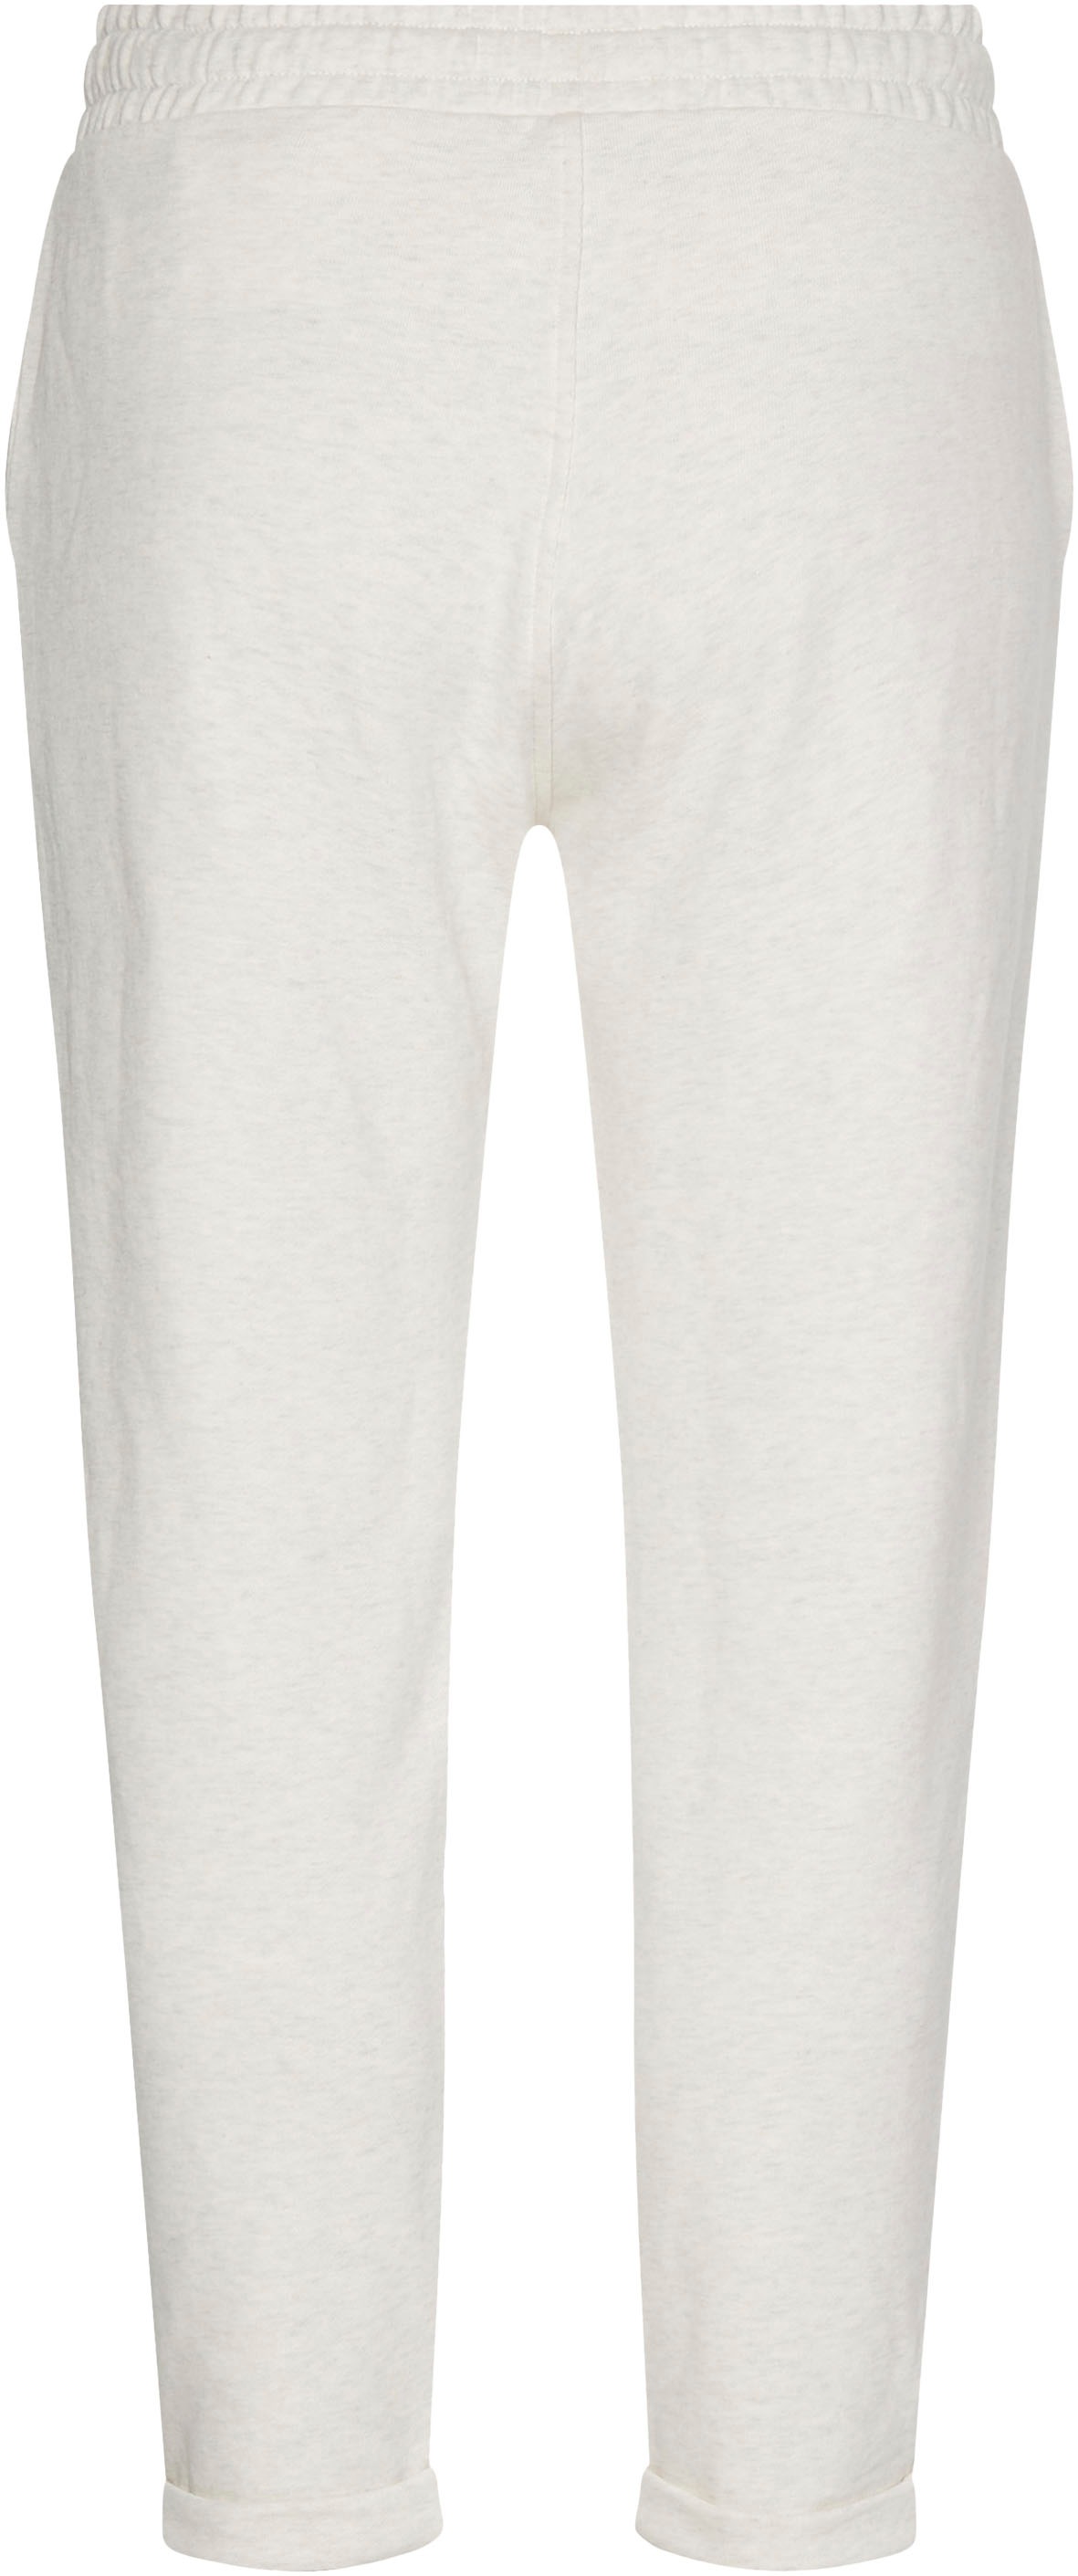 SWEATPANTS«, »TAPERED OTTO im Tommy Shop mit ROUNDALL Hilfiger Hilfiger Tommy Sweatpants kaufen Online Markenlabel NYC